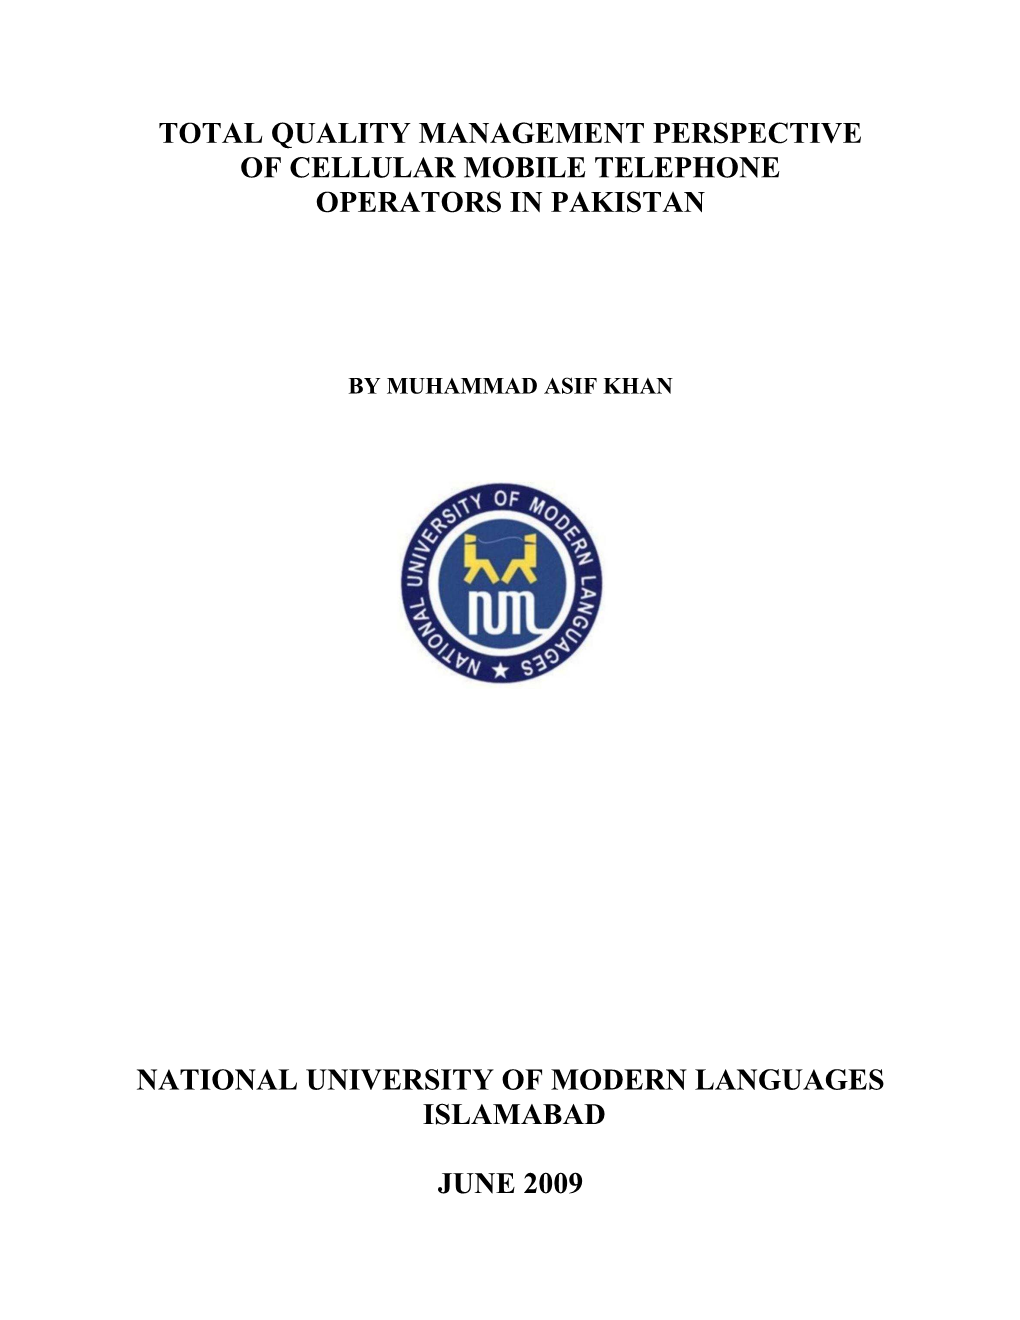 Total Quality Management Perspective of Cellular Mobile Telephone Operators in Pakistan